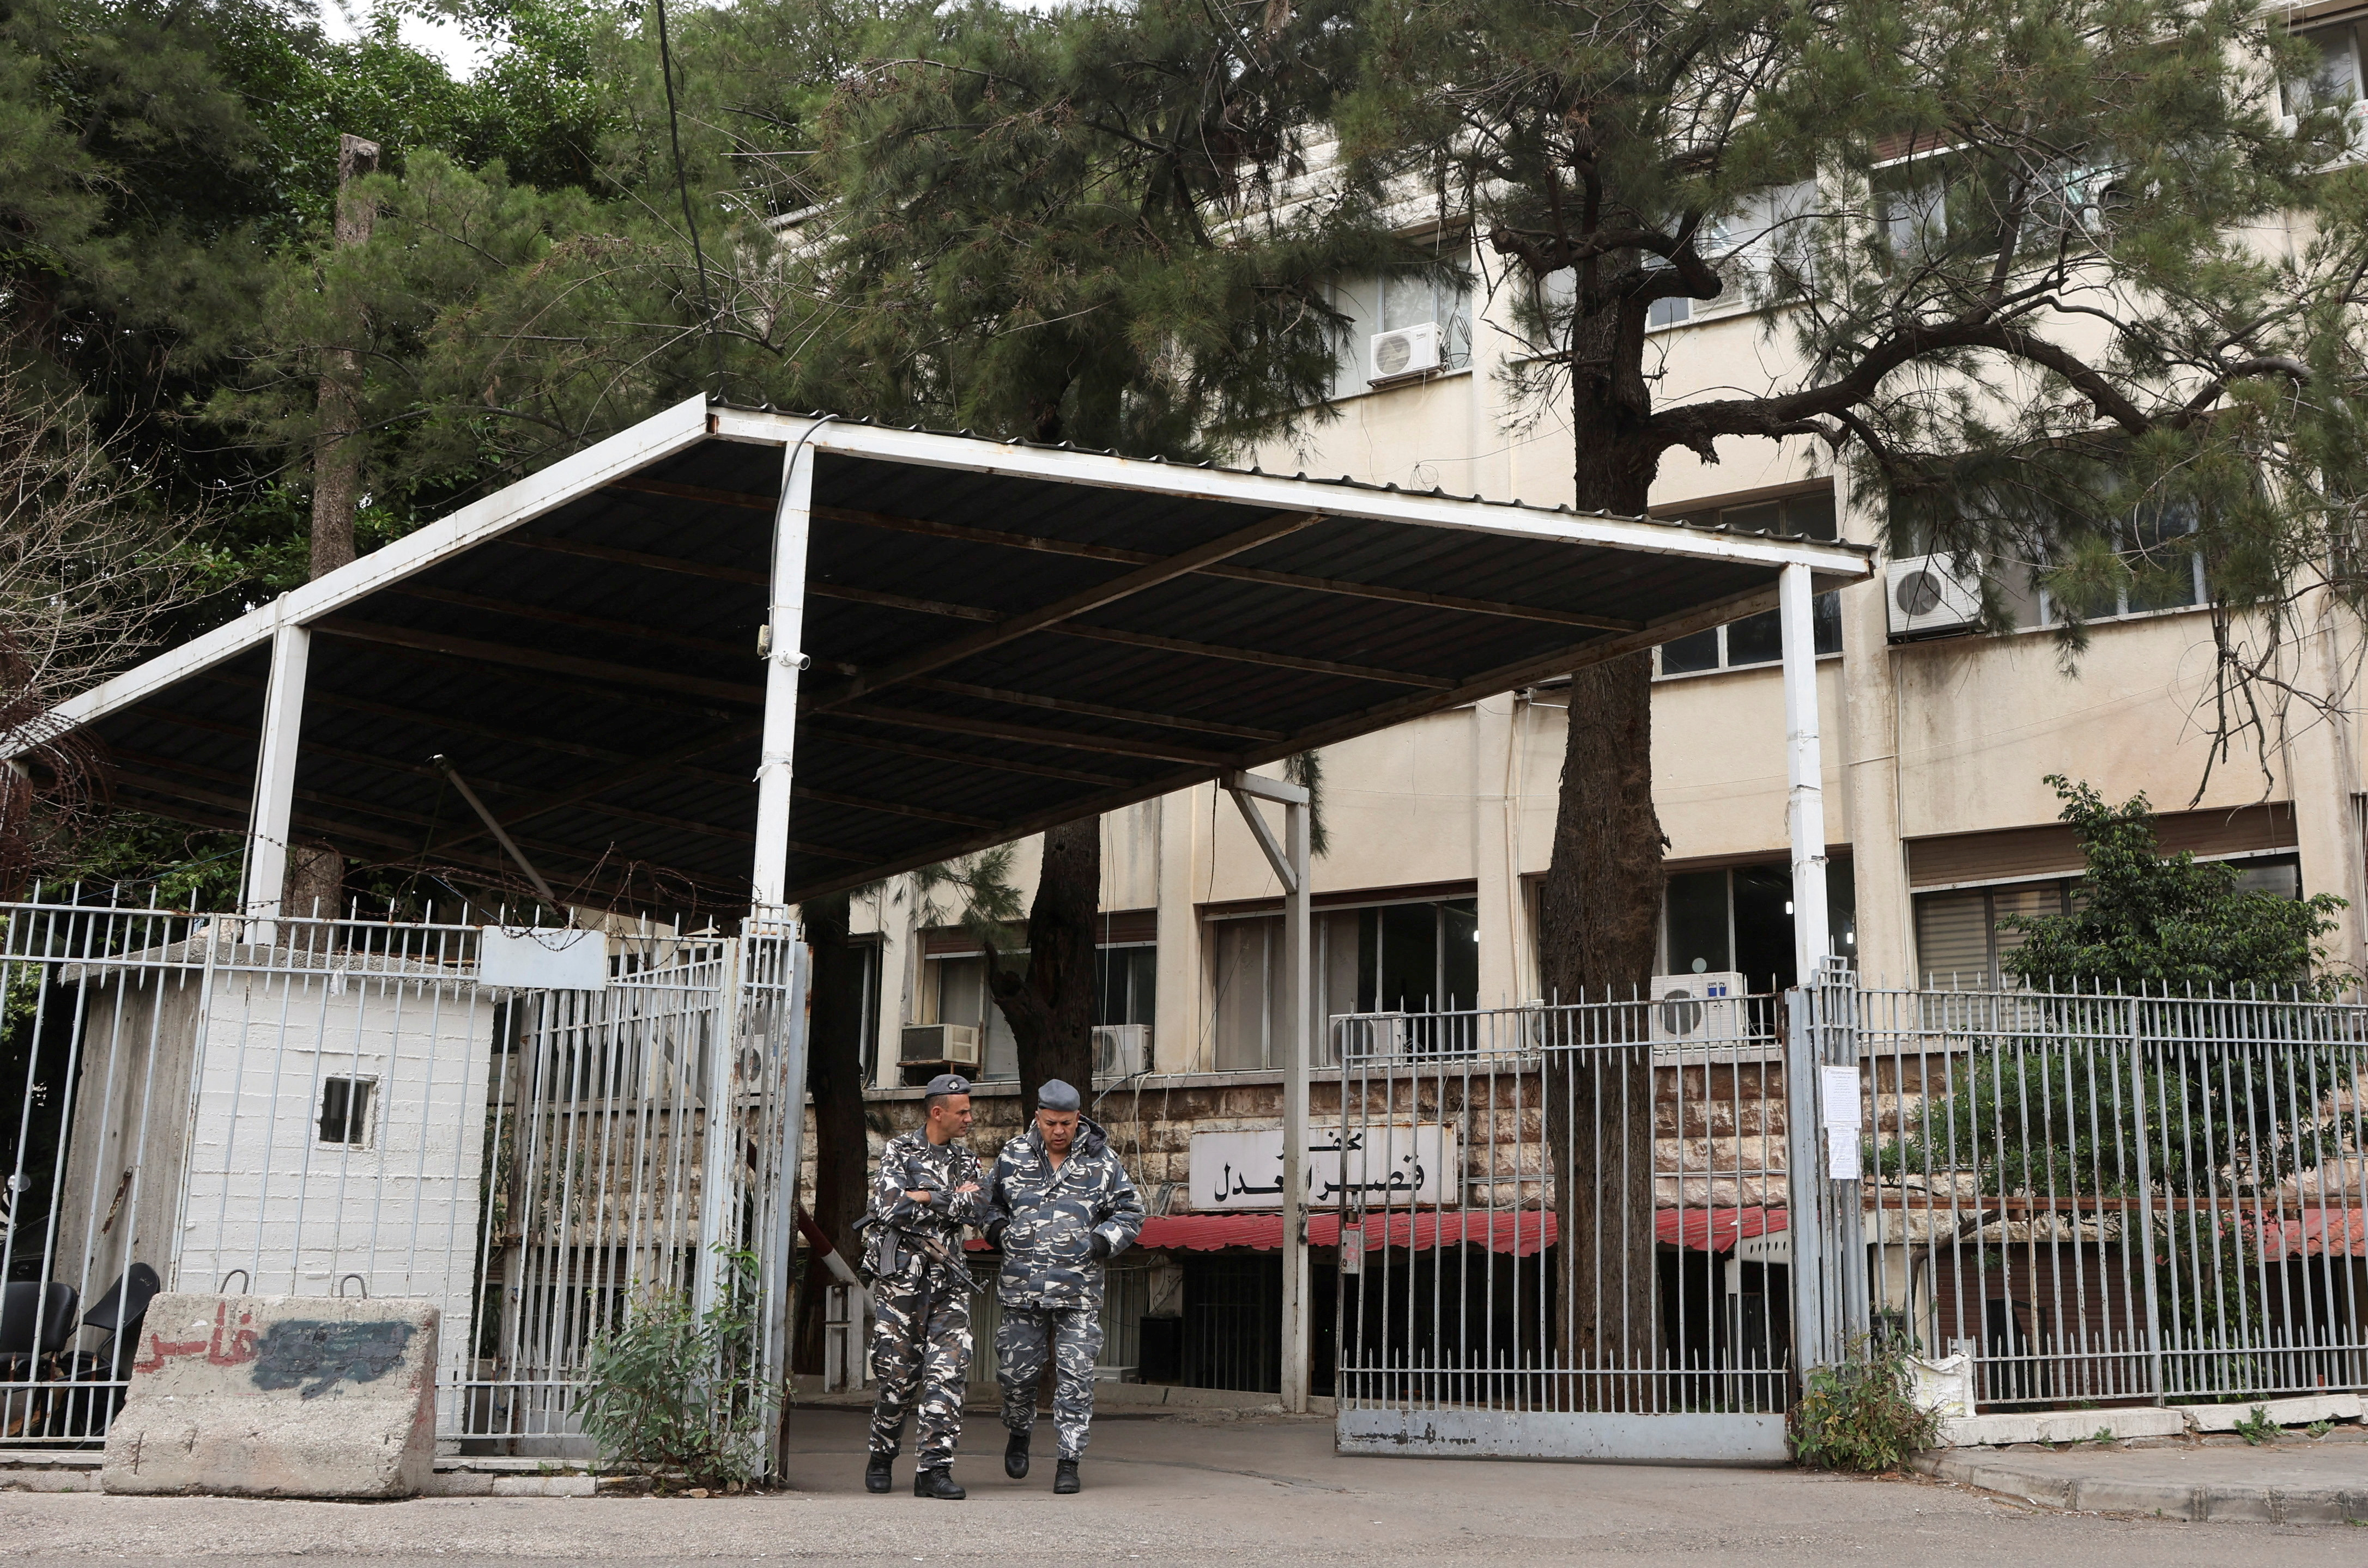 Lebanese police stand outside the Justice Palace as Lebanon's central bank governor Riad Salameh attends a court hearing